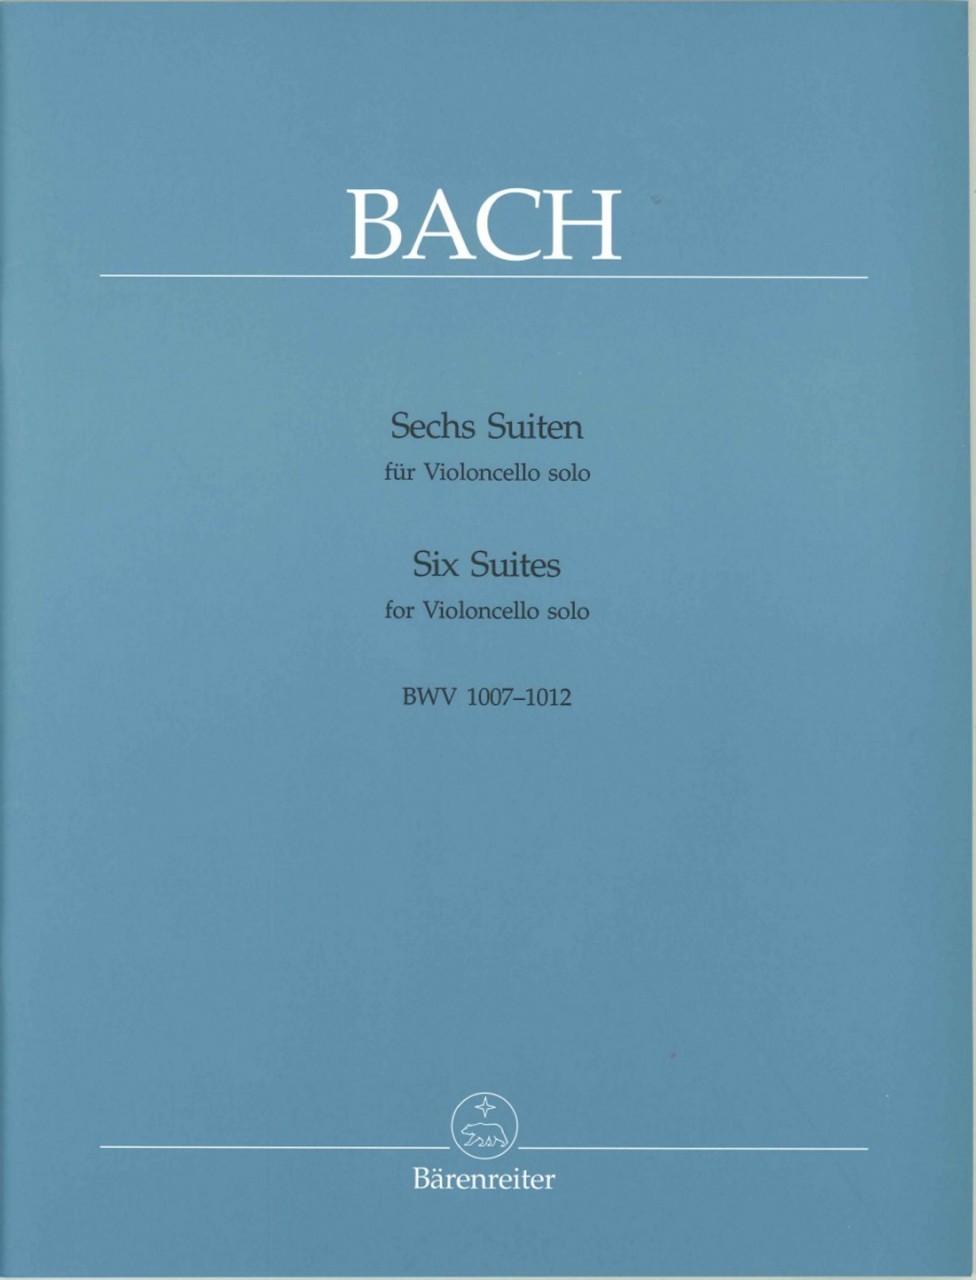 Six　JS:　(Bärenreiter)　1007-1012　for　Cello,　BWV　Suites　Musical　Imports　Bach,　Midwest